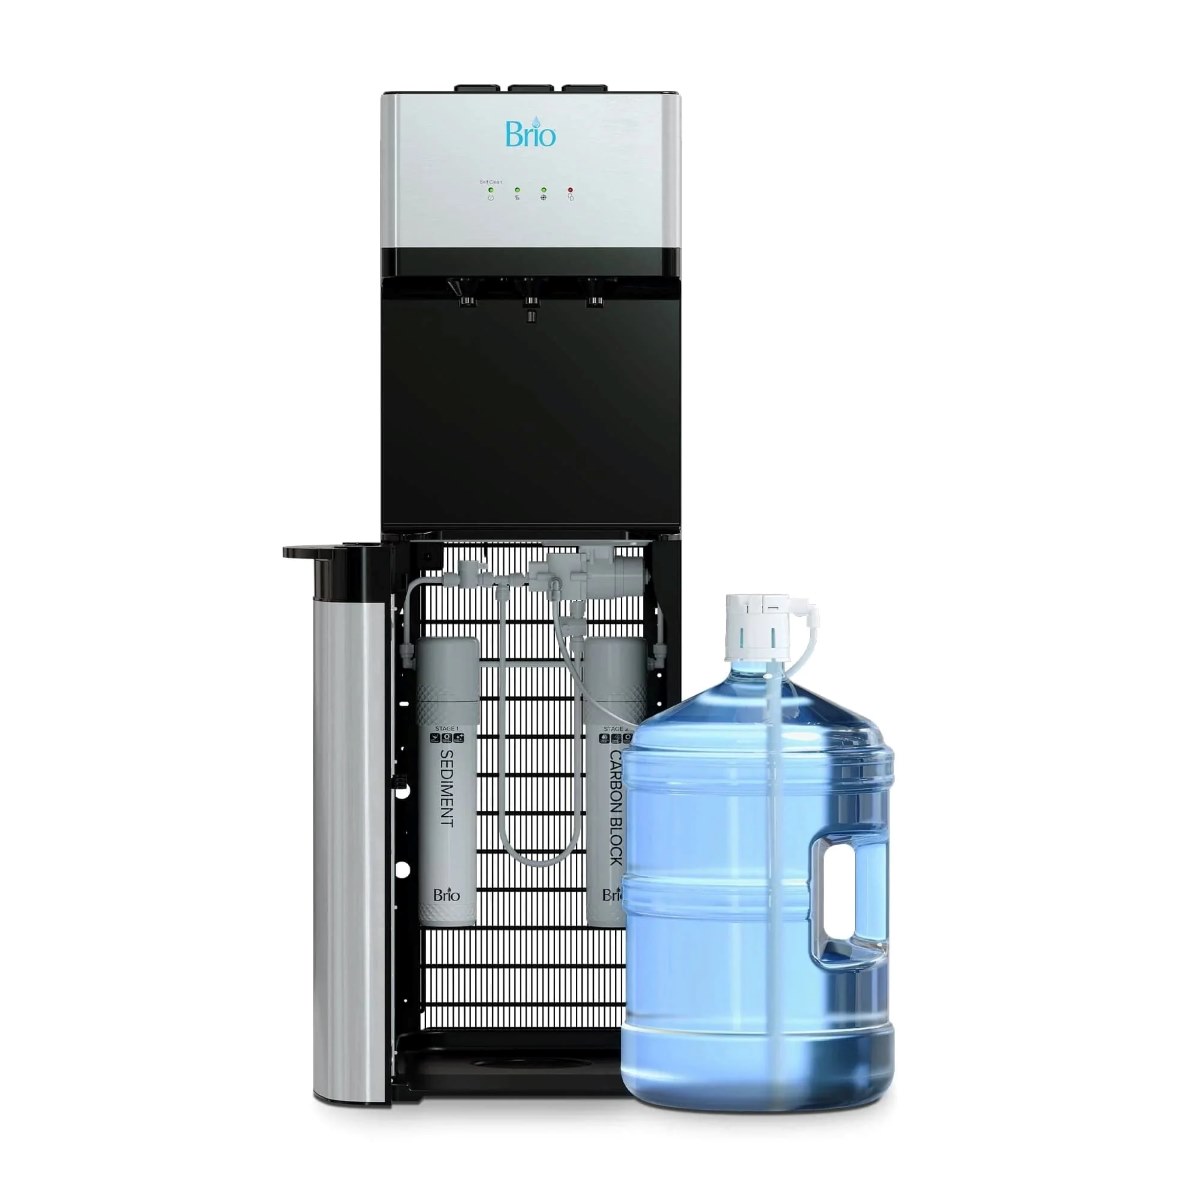 How To Set Up Brio Water Dispenser